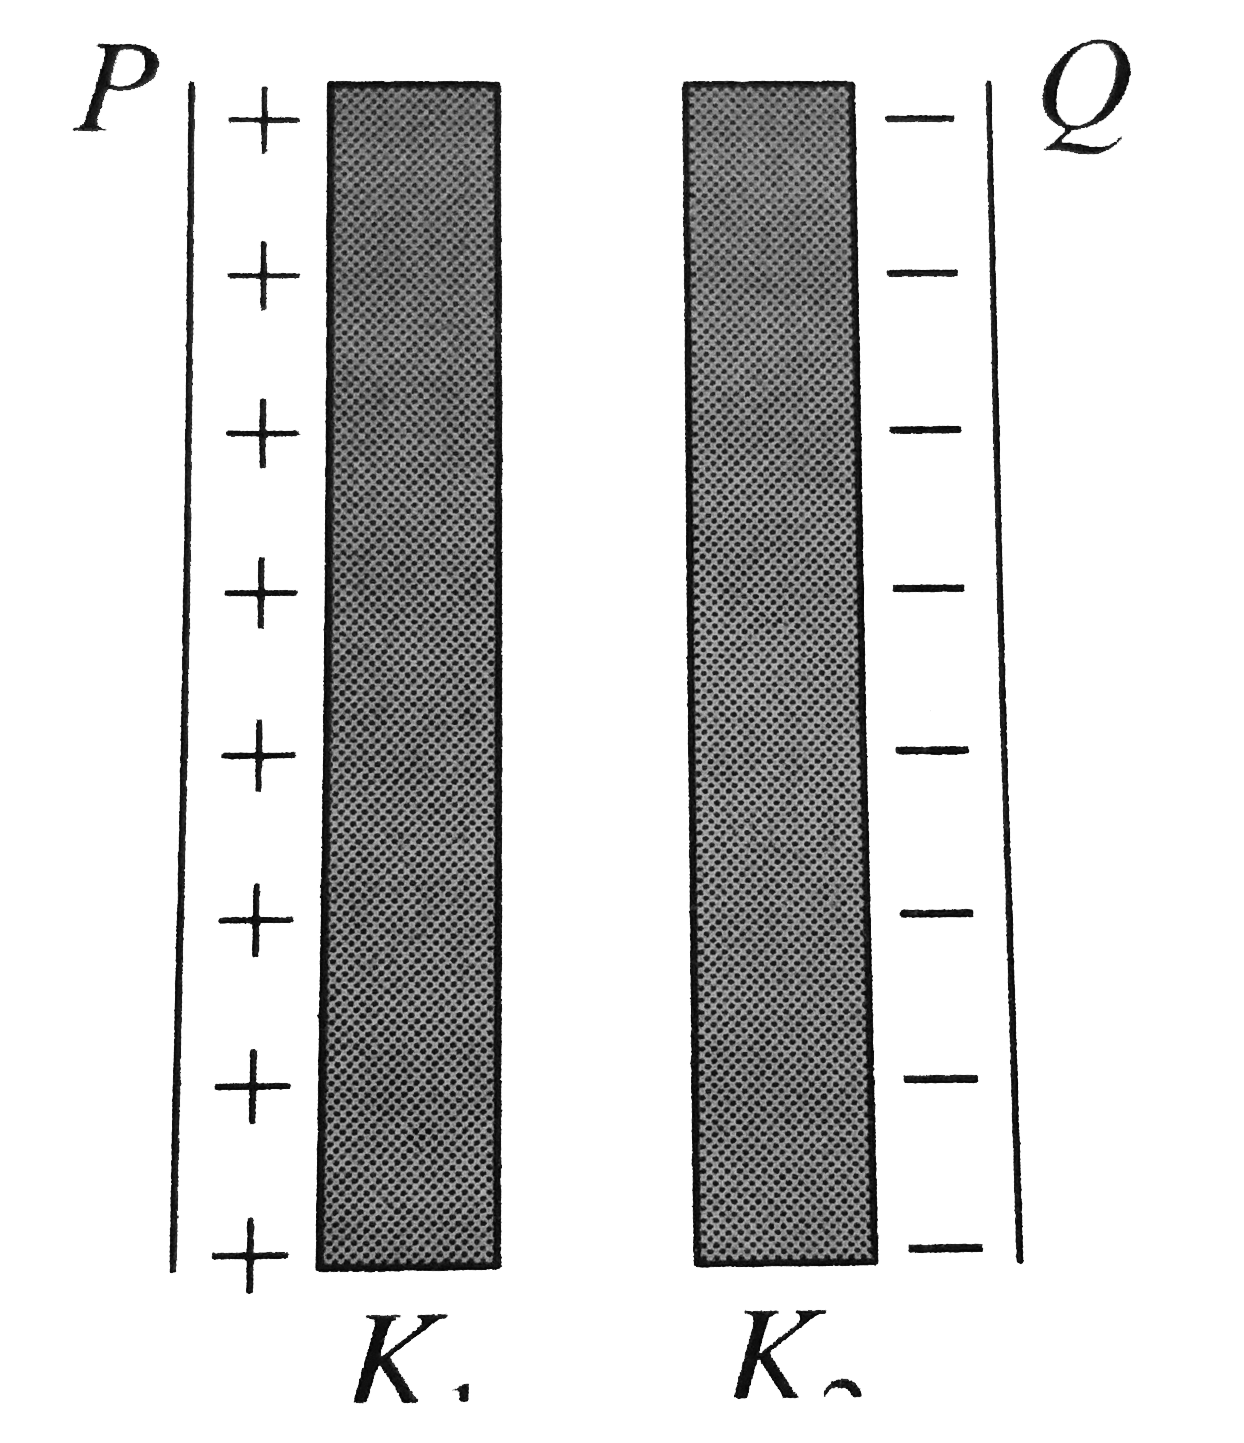 Two thin dielectric slabs of dielectric constants K(1) and K(2) (K(1) lt K(2)) are inserted between plates of a parallel plate capacitor, as shown in the figure. The variation of electric field E between the plates with distance d as measured from plate P is correctly shown by